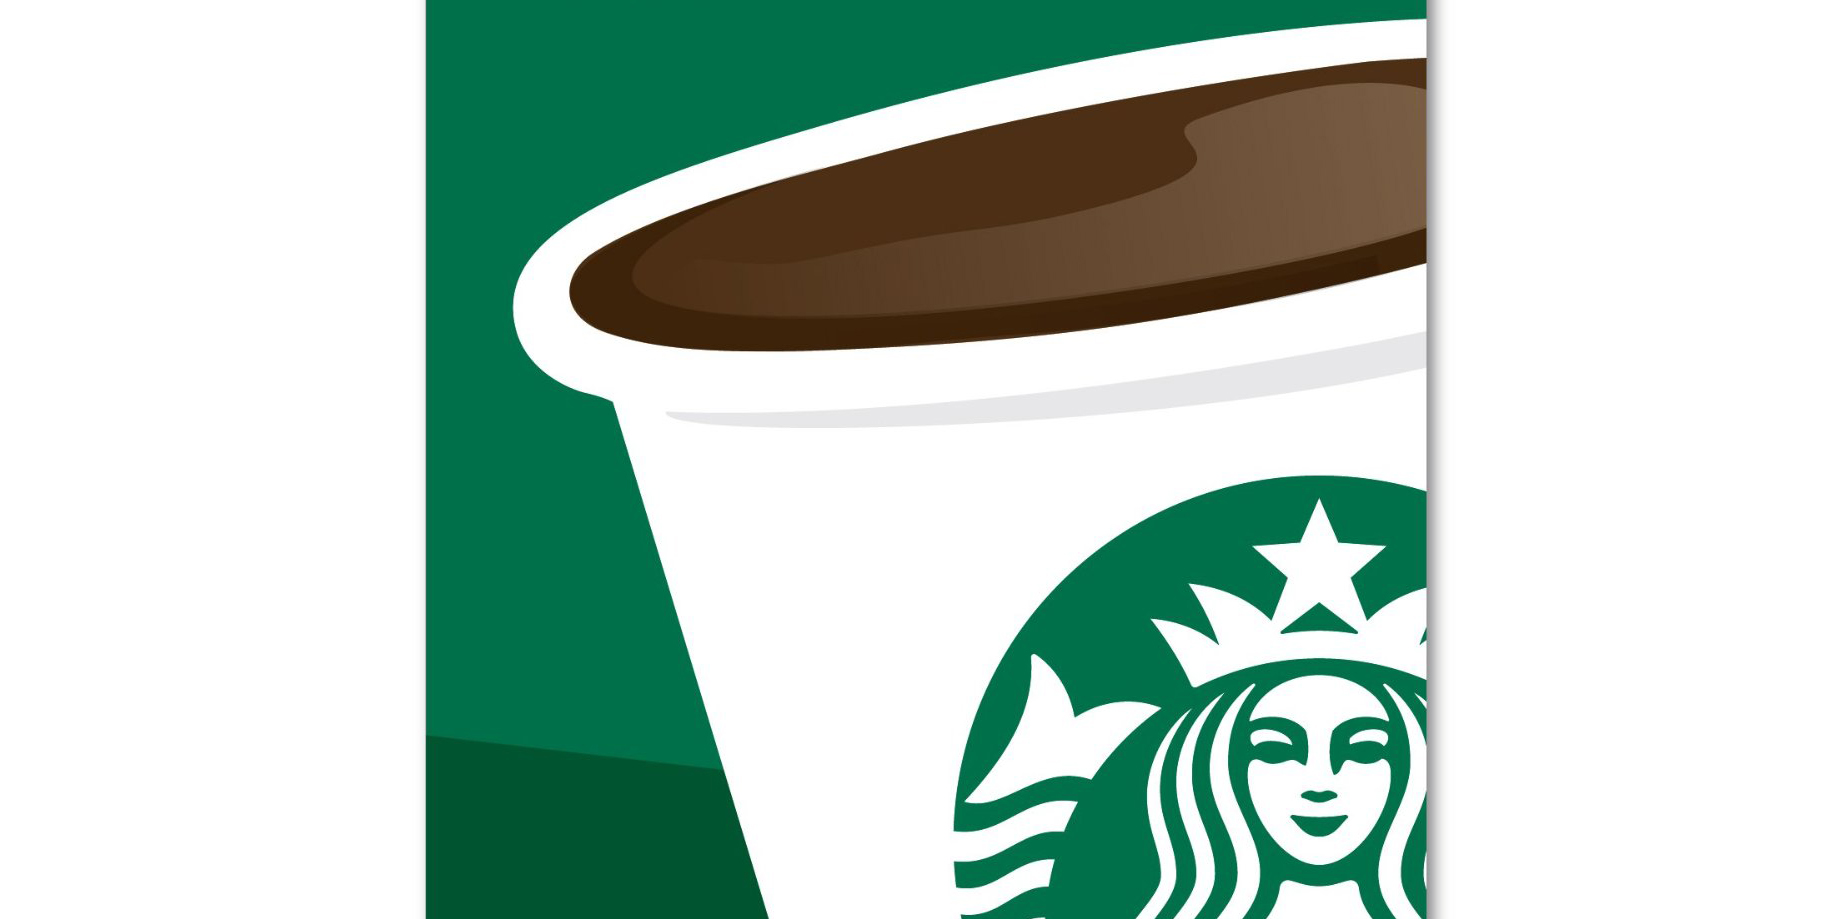 Snag a 50 Starbucks gift card and get 5 to spend on